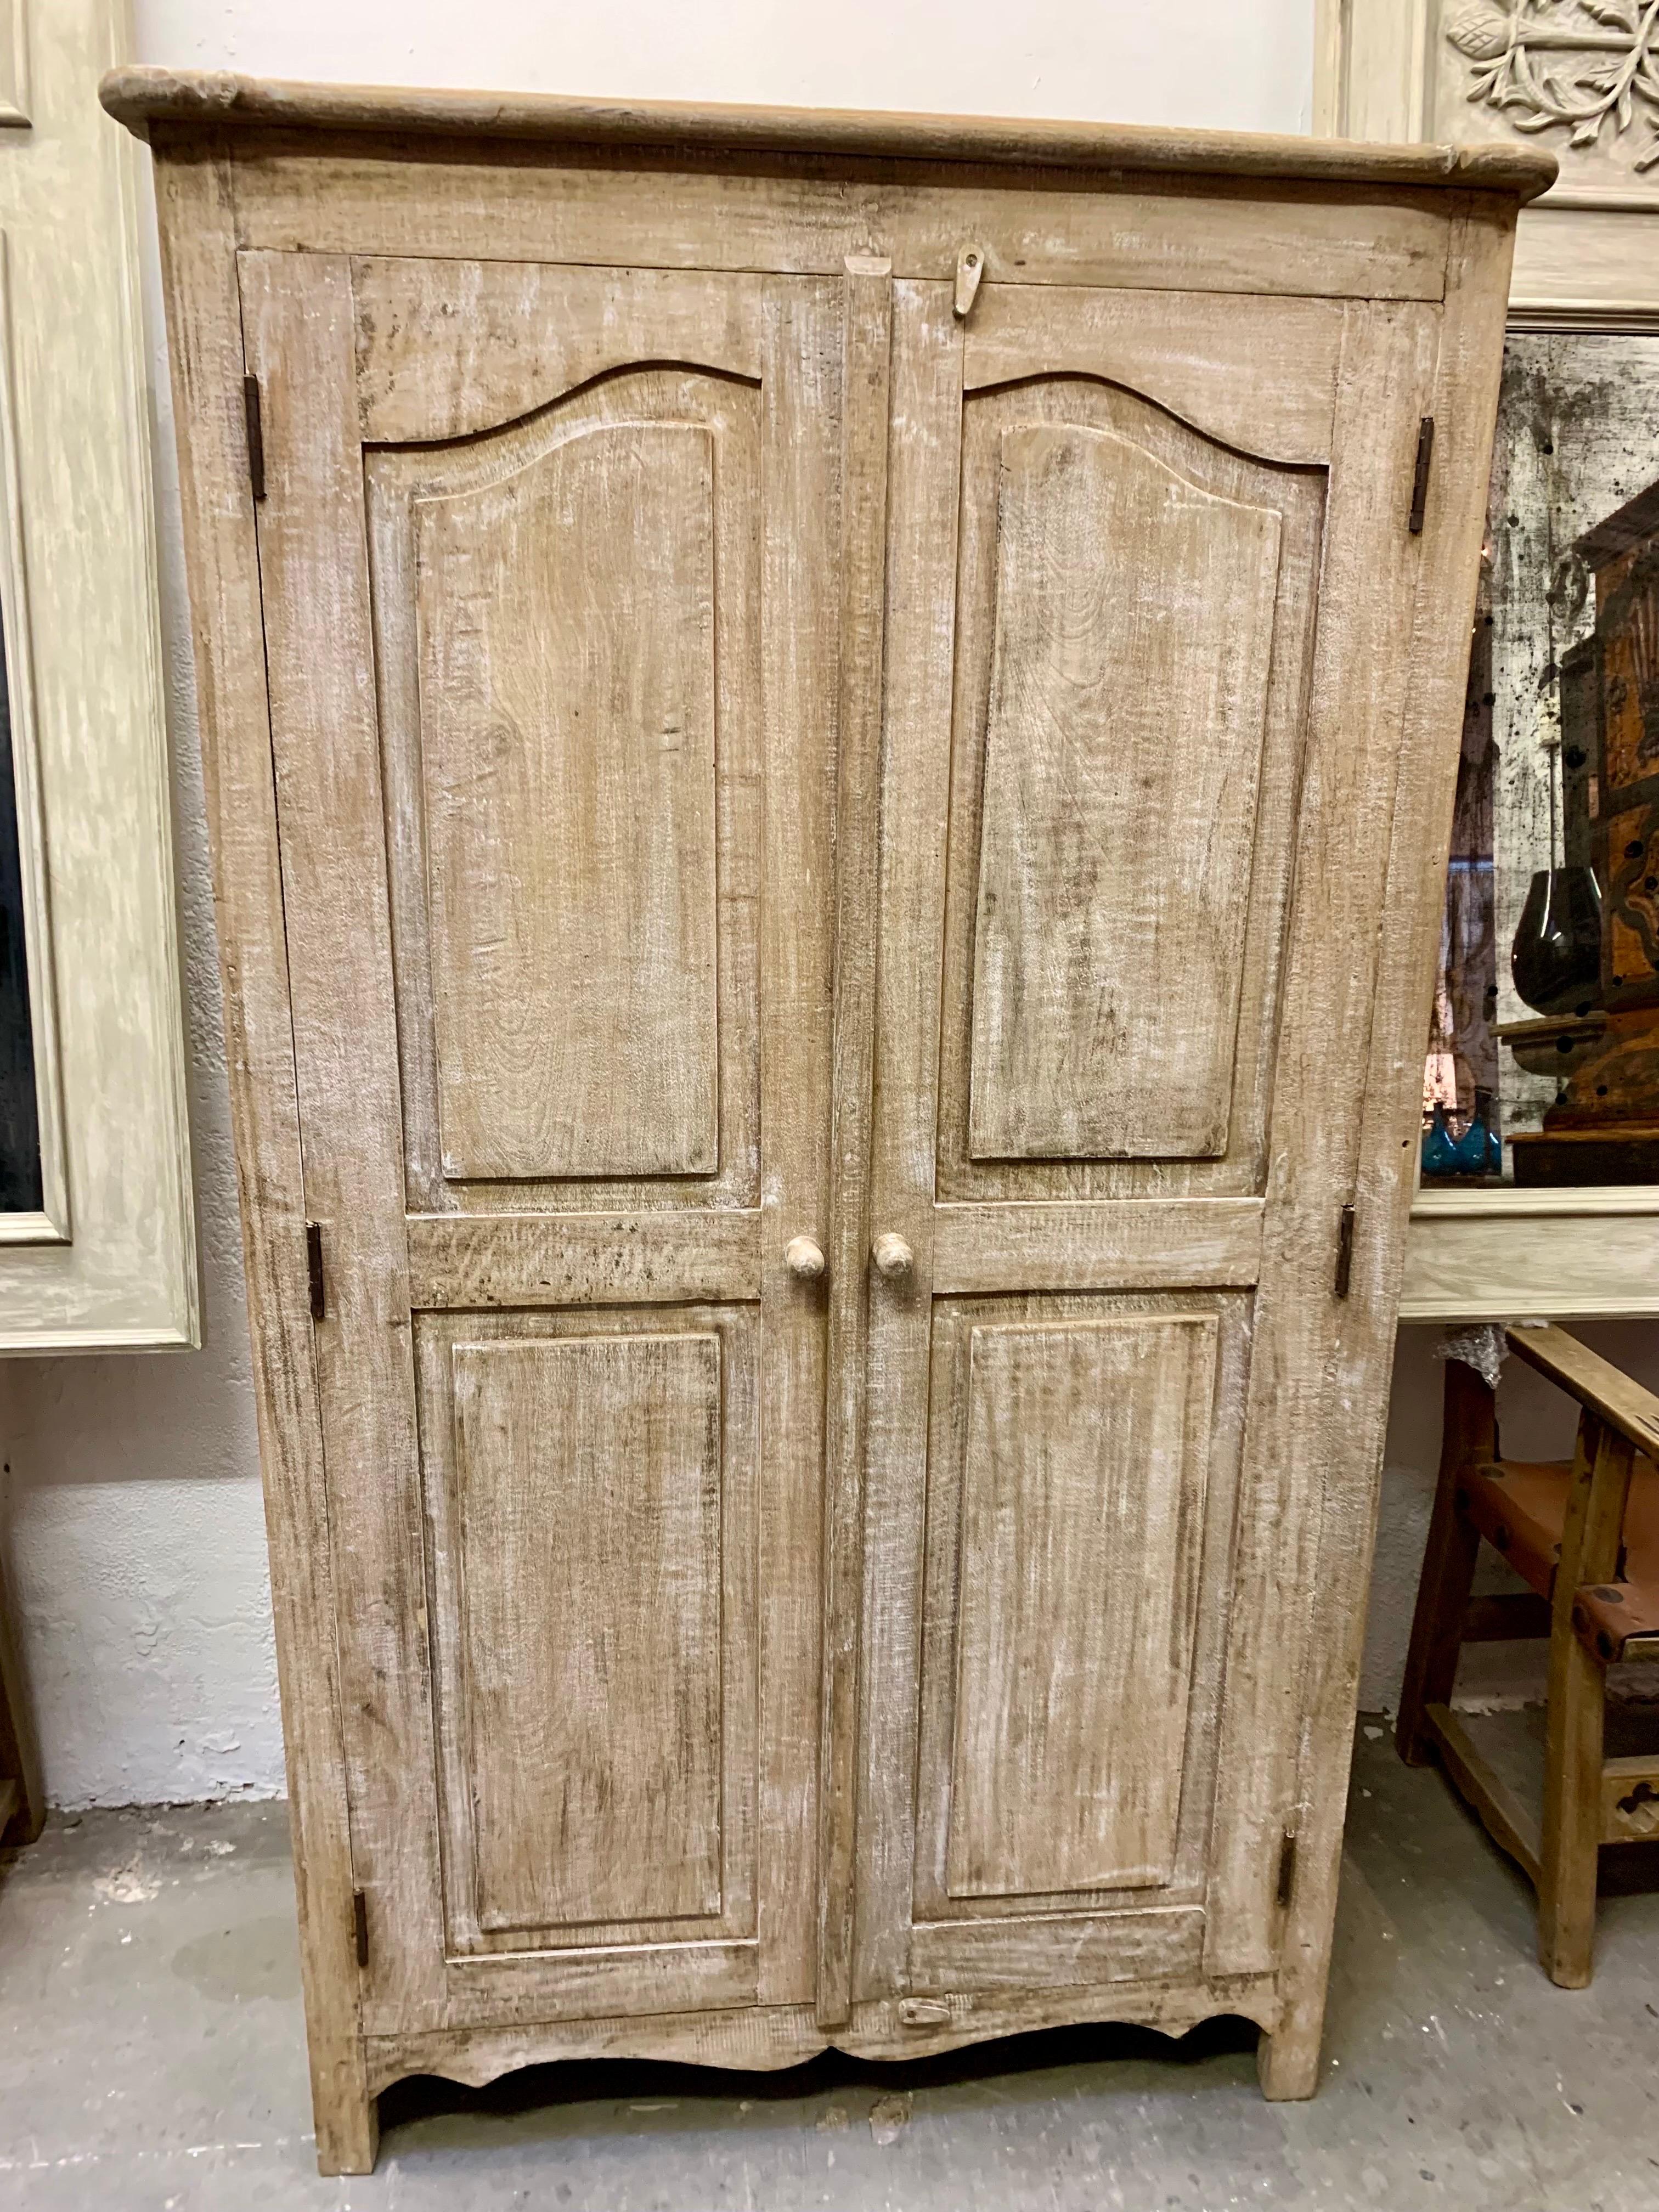 Spanish rustic patinated painted pine wood furniture, early 20th century. The article presents a construction in a single part with two doors, made of solid aged pine wood. The interior is divided into two zones, one with shelves and the other free.